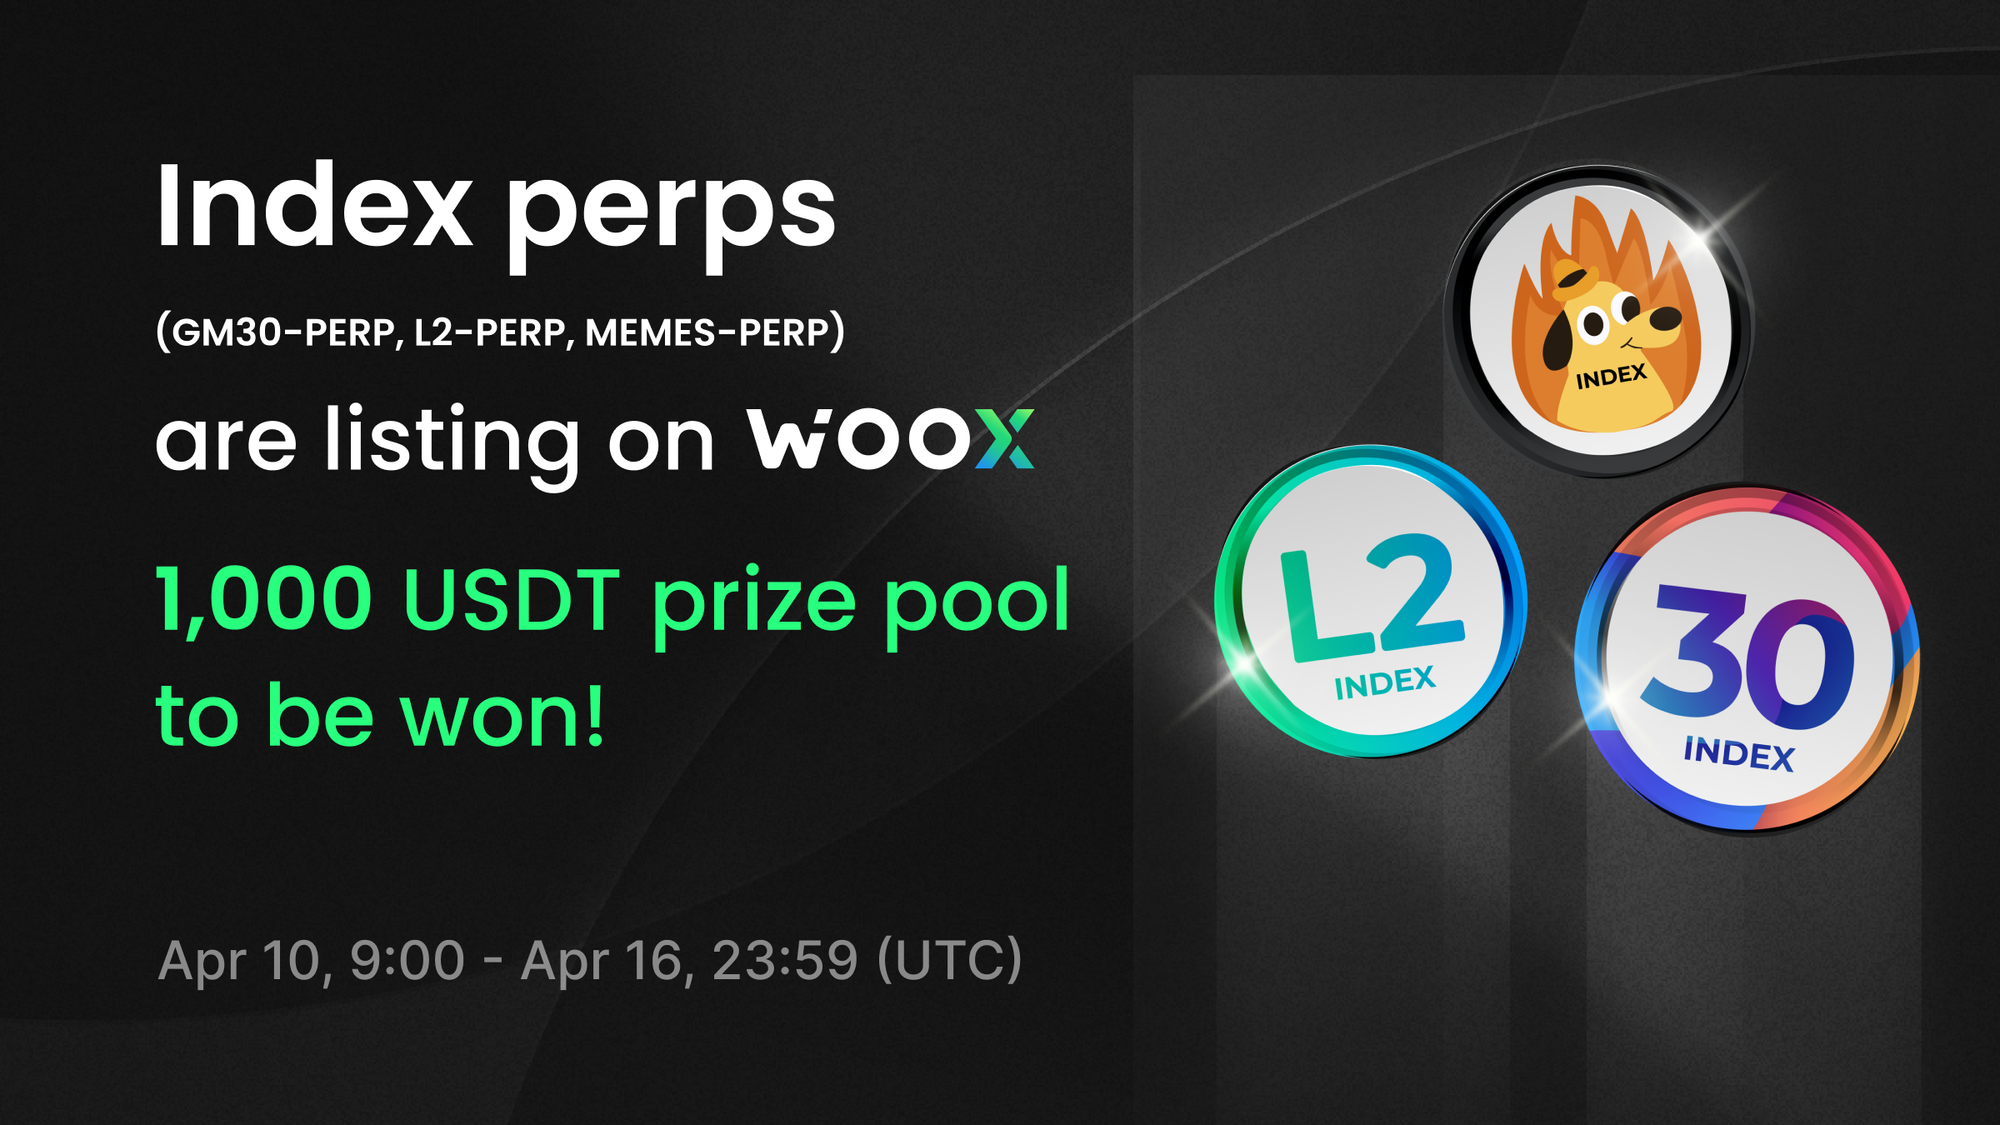 New Listing: Index perps (GM30-PERP, L2-PERP, MEMES-PERP) on WOO X - 1,000 USDT Learn and Earn!